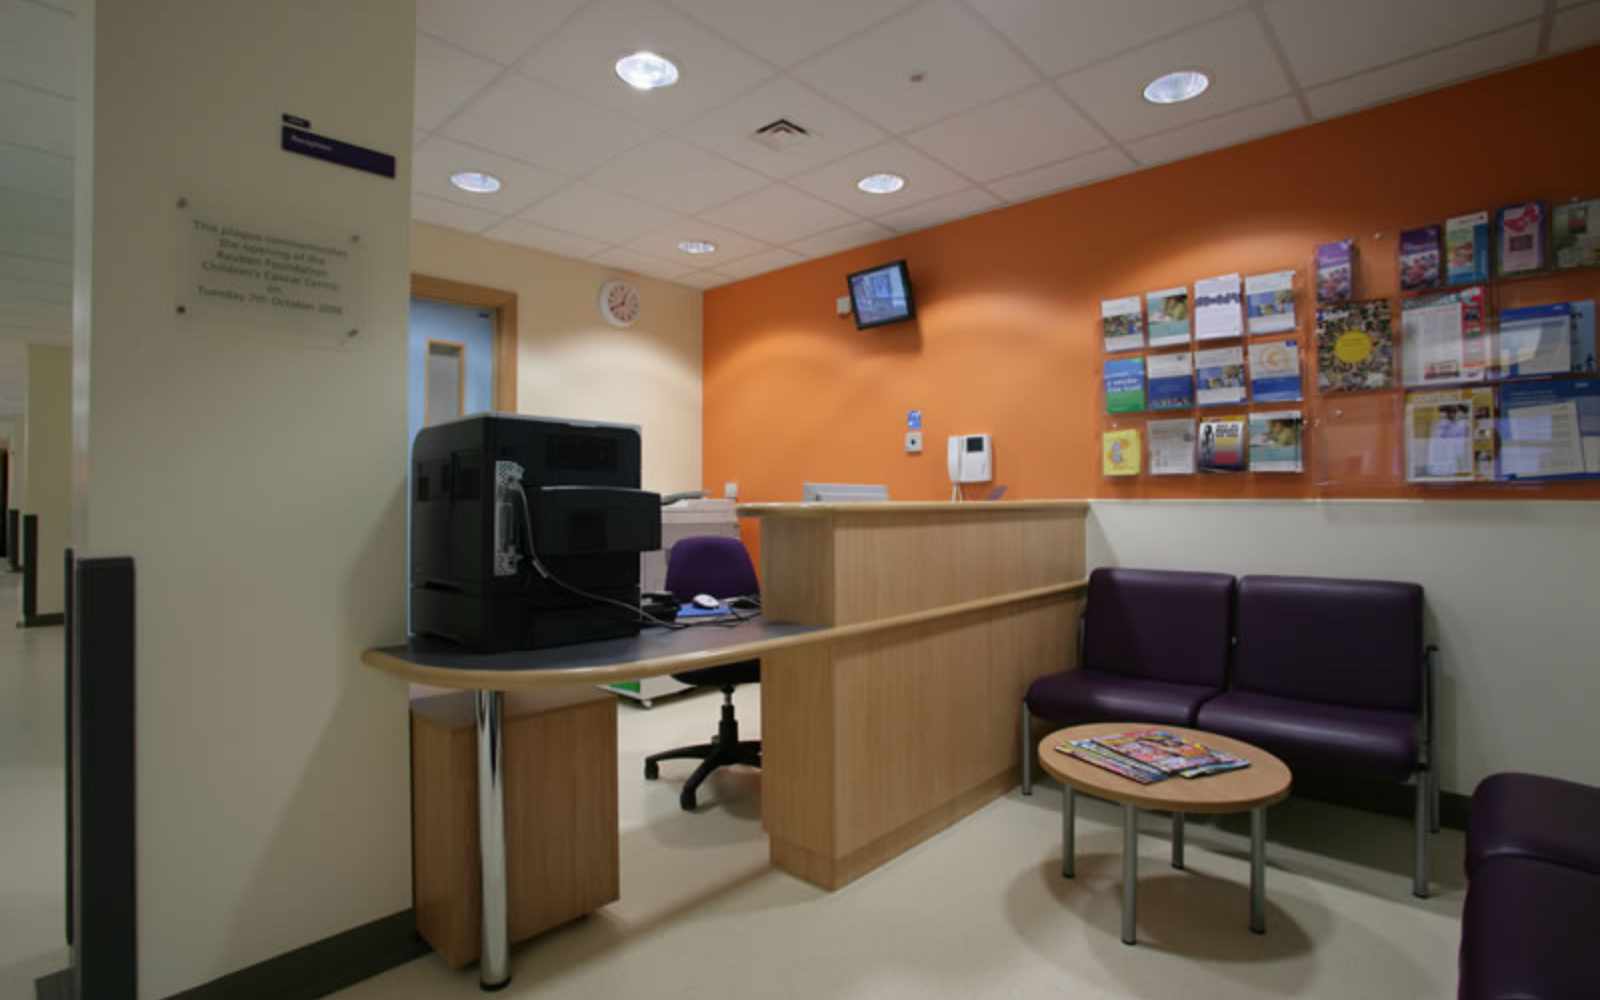 Healthcare furniture for Great Ormond Street Hospital